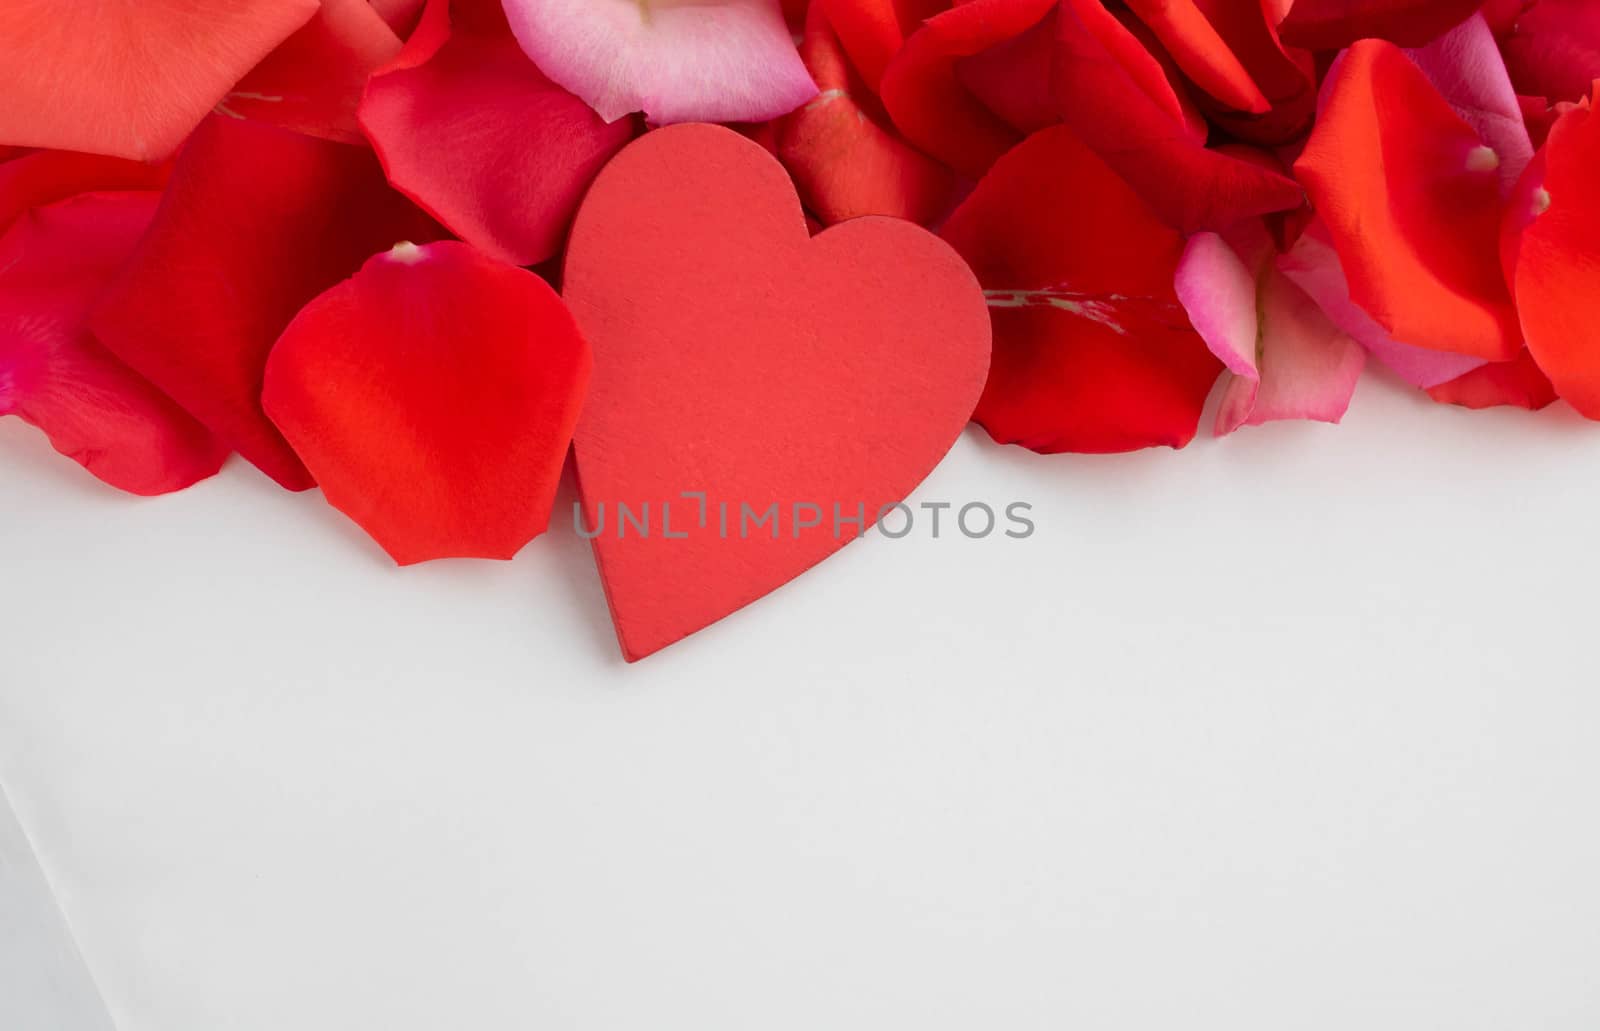 On the red rose petals is a red wooden heart.Concept of mother's Day, family Day, Valentine's Day, March 8